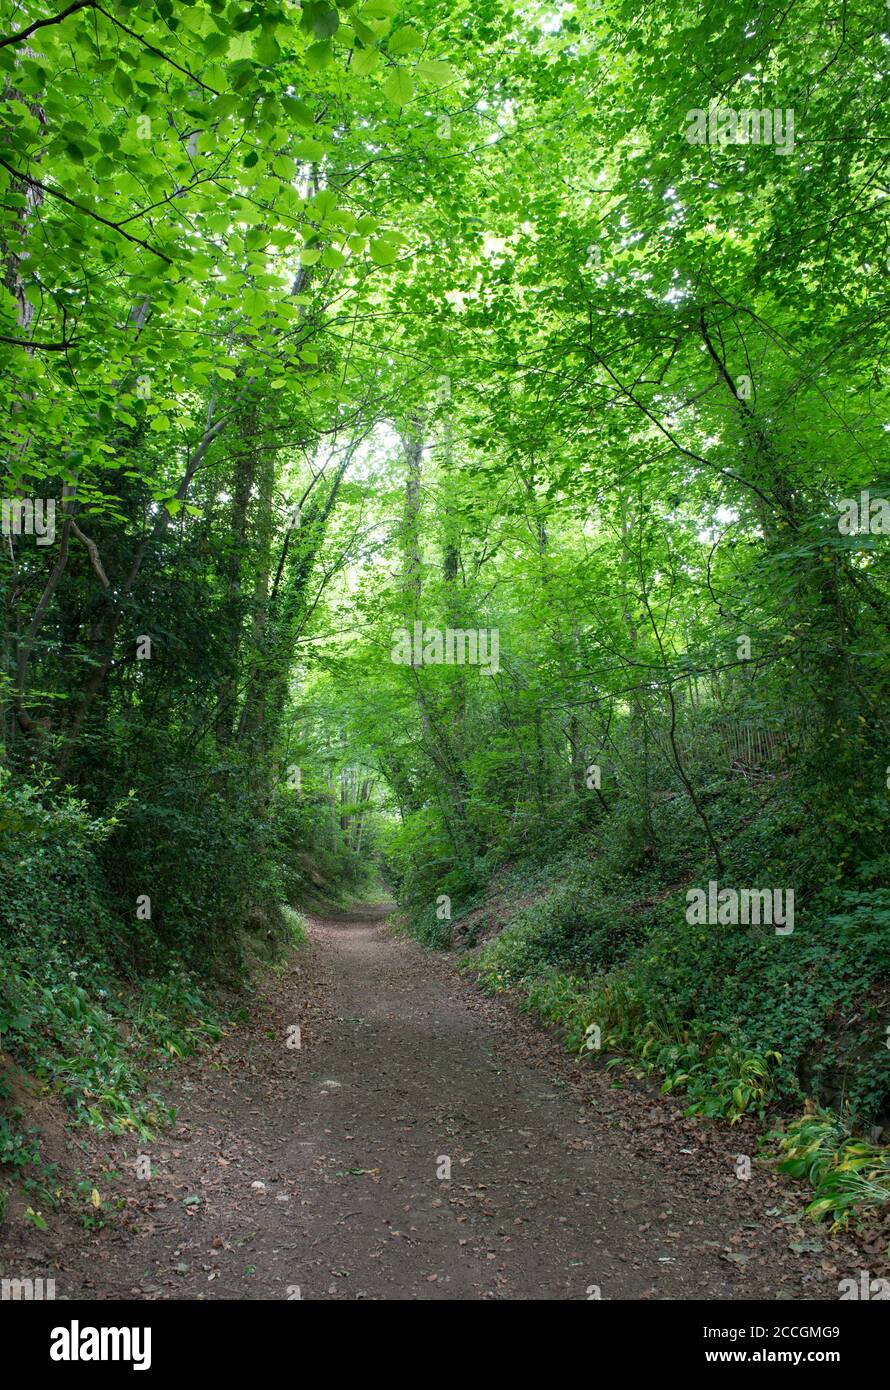 Summer view of a sunken lane surrounded by trees at Boston Spa, West Yorkshire Stock Photo